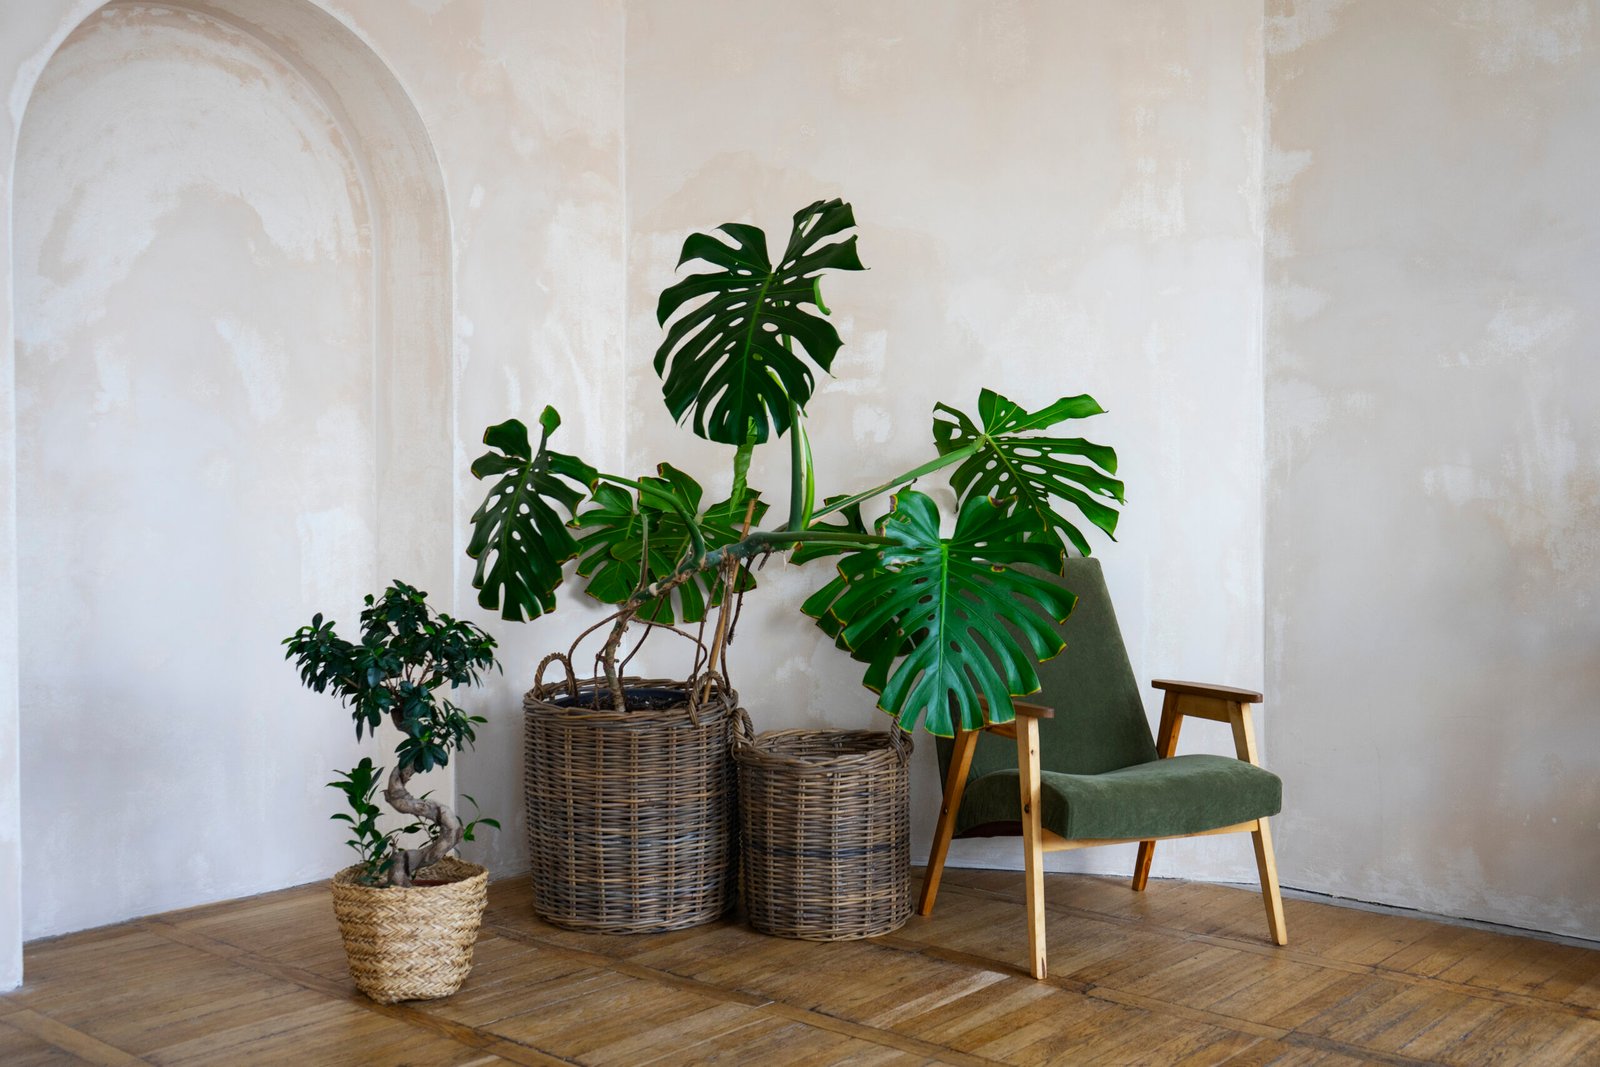 Room decor with potted monstera plant scaled.